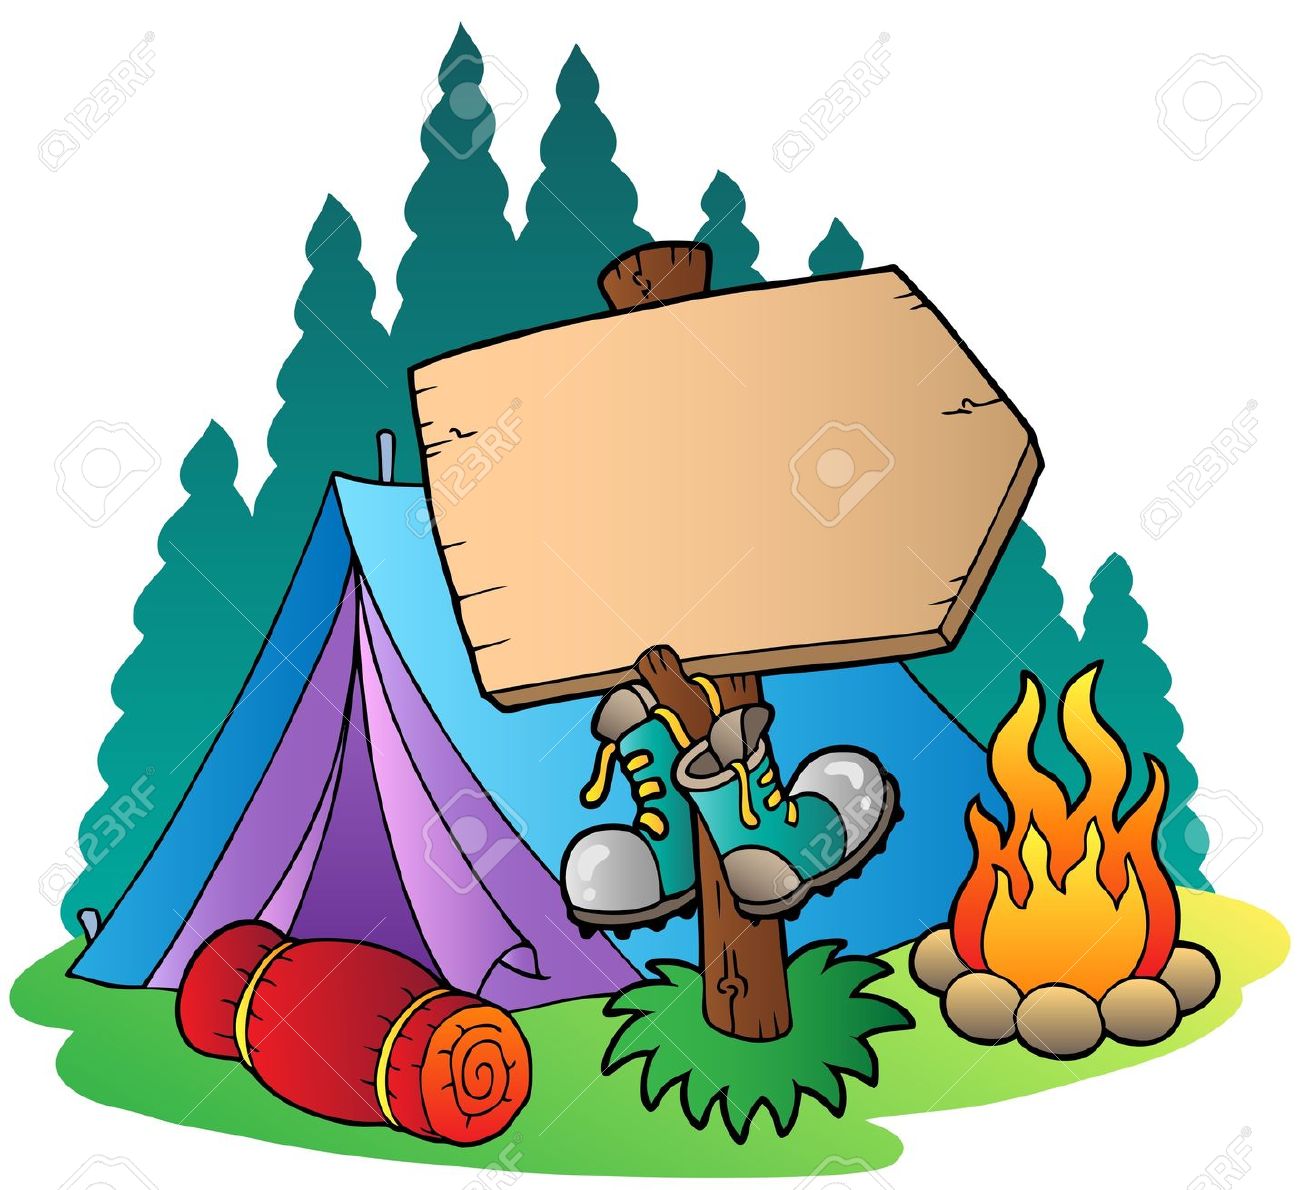 Camping clip art products .